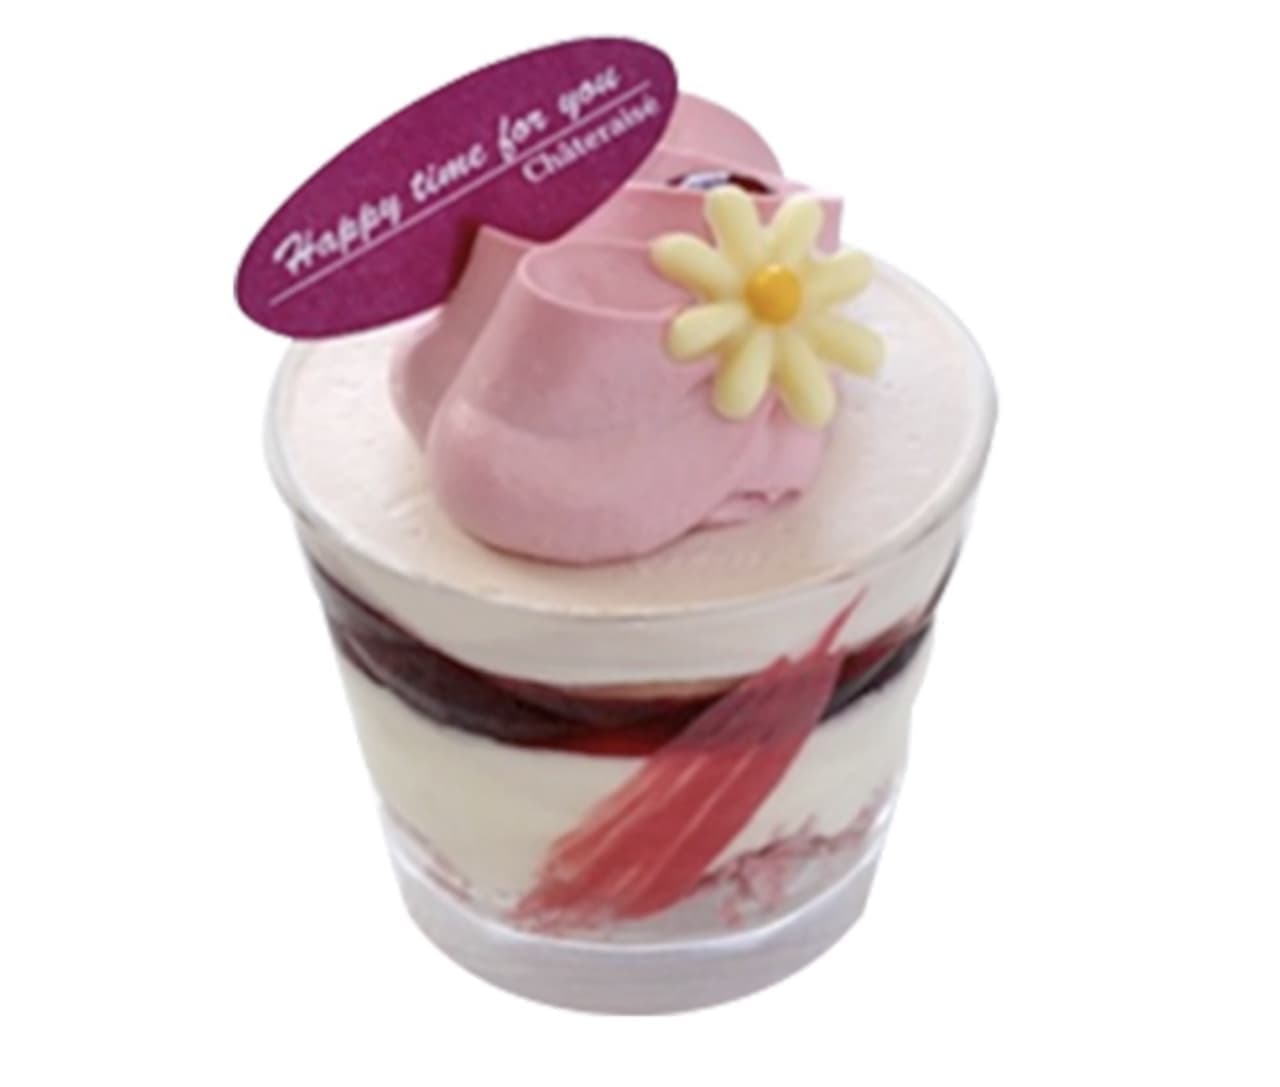 Chateraise "Blueberry Cup Dessert with Hokkaido Pure Fresh Cream